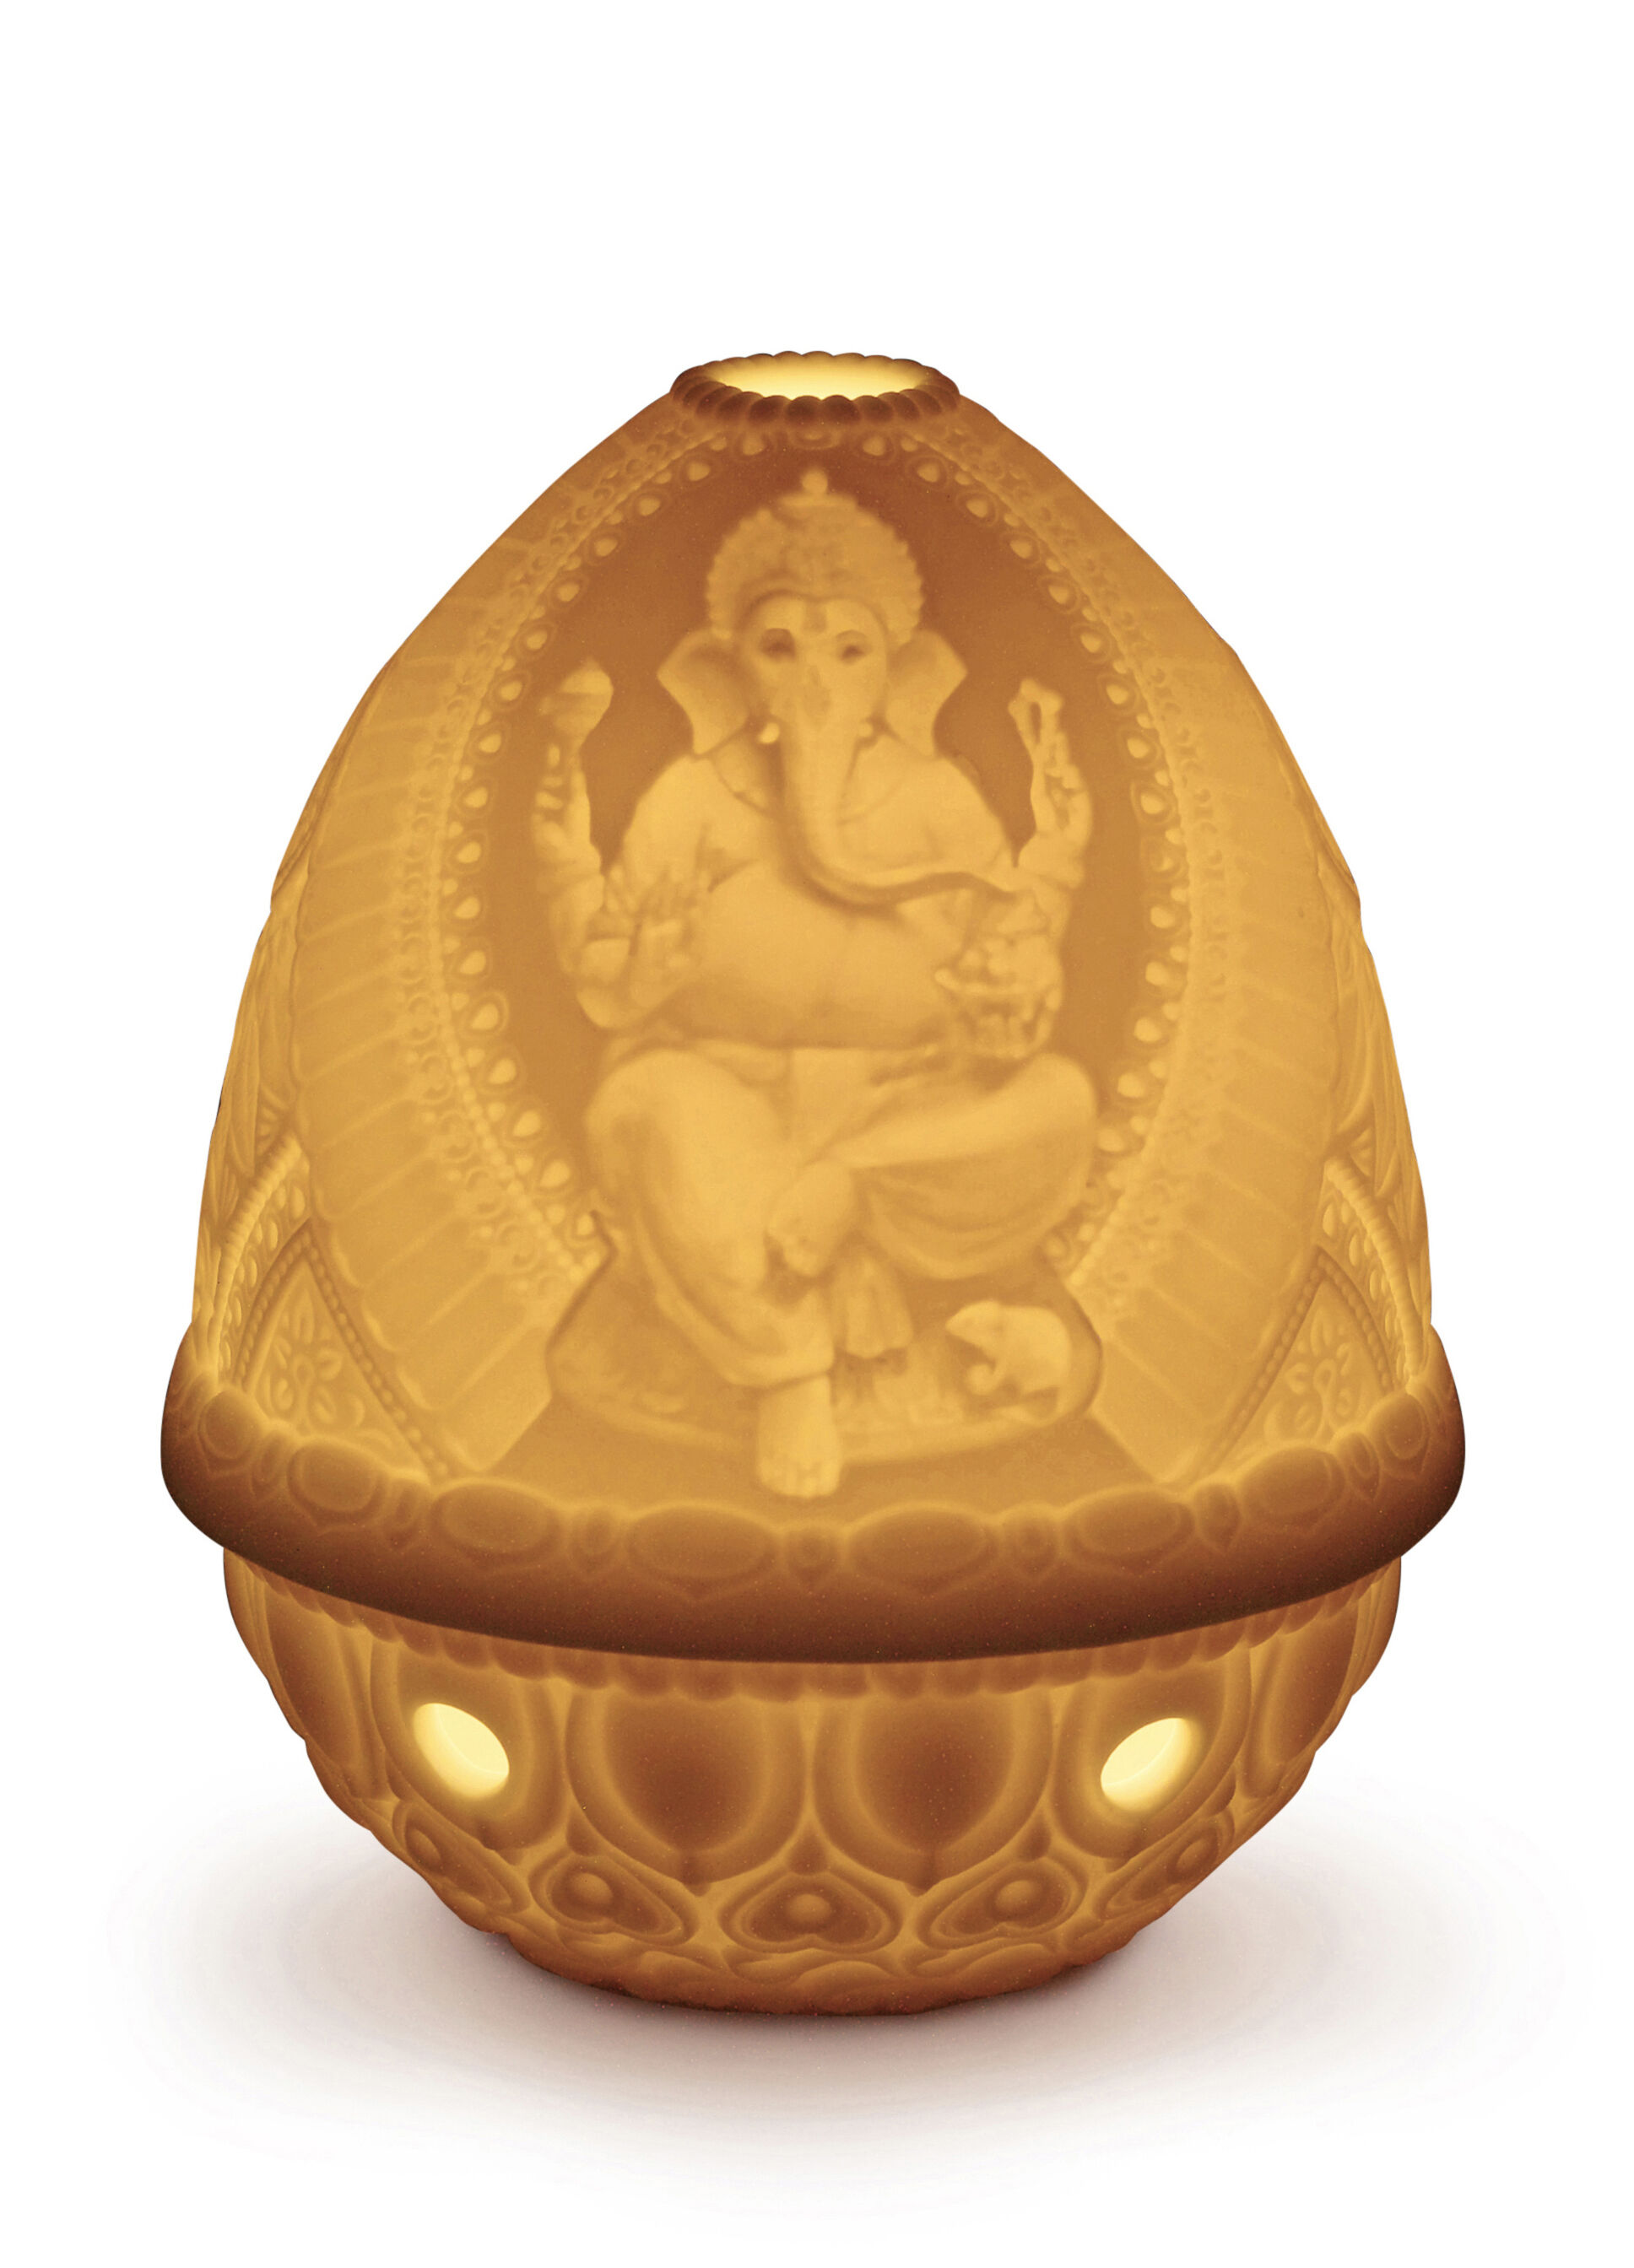 lladro-lord-ganesha-lithophane-with-rechargeable-led-light-3.5x3.5x4.7-in-01017318.jpg